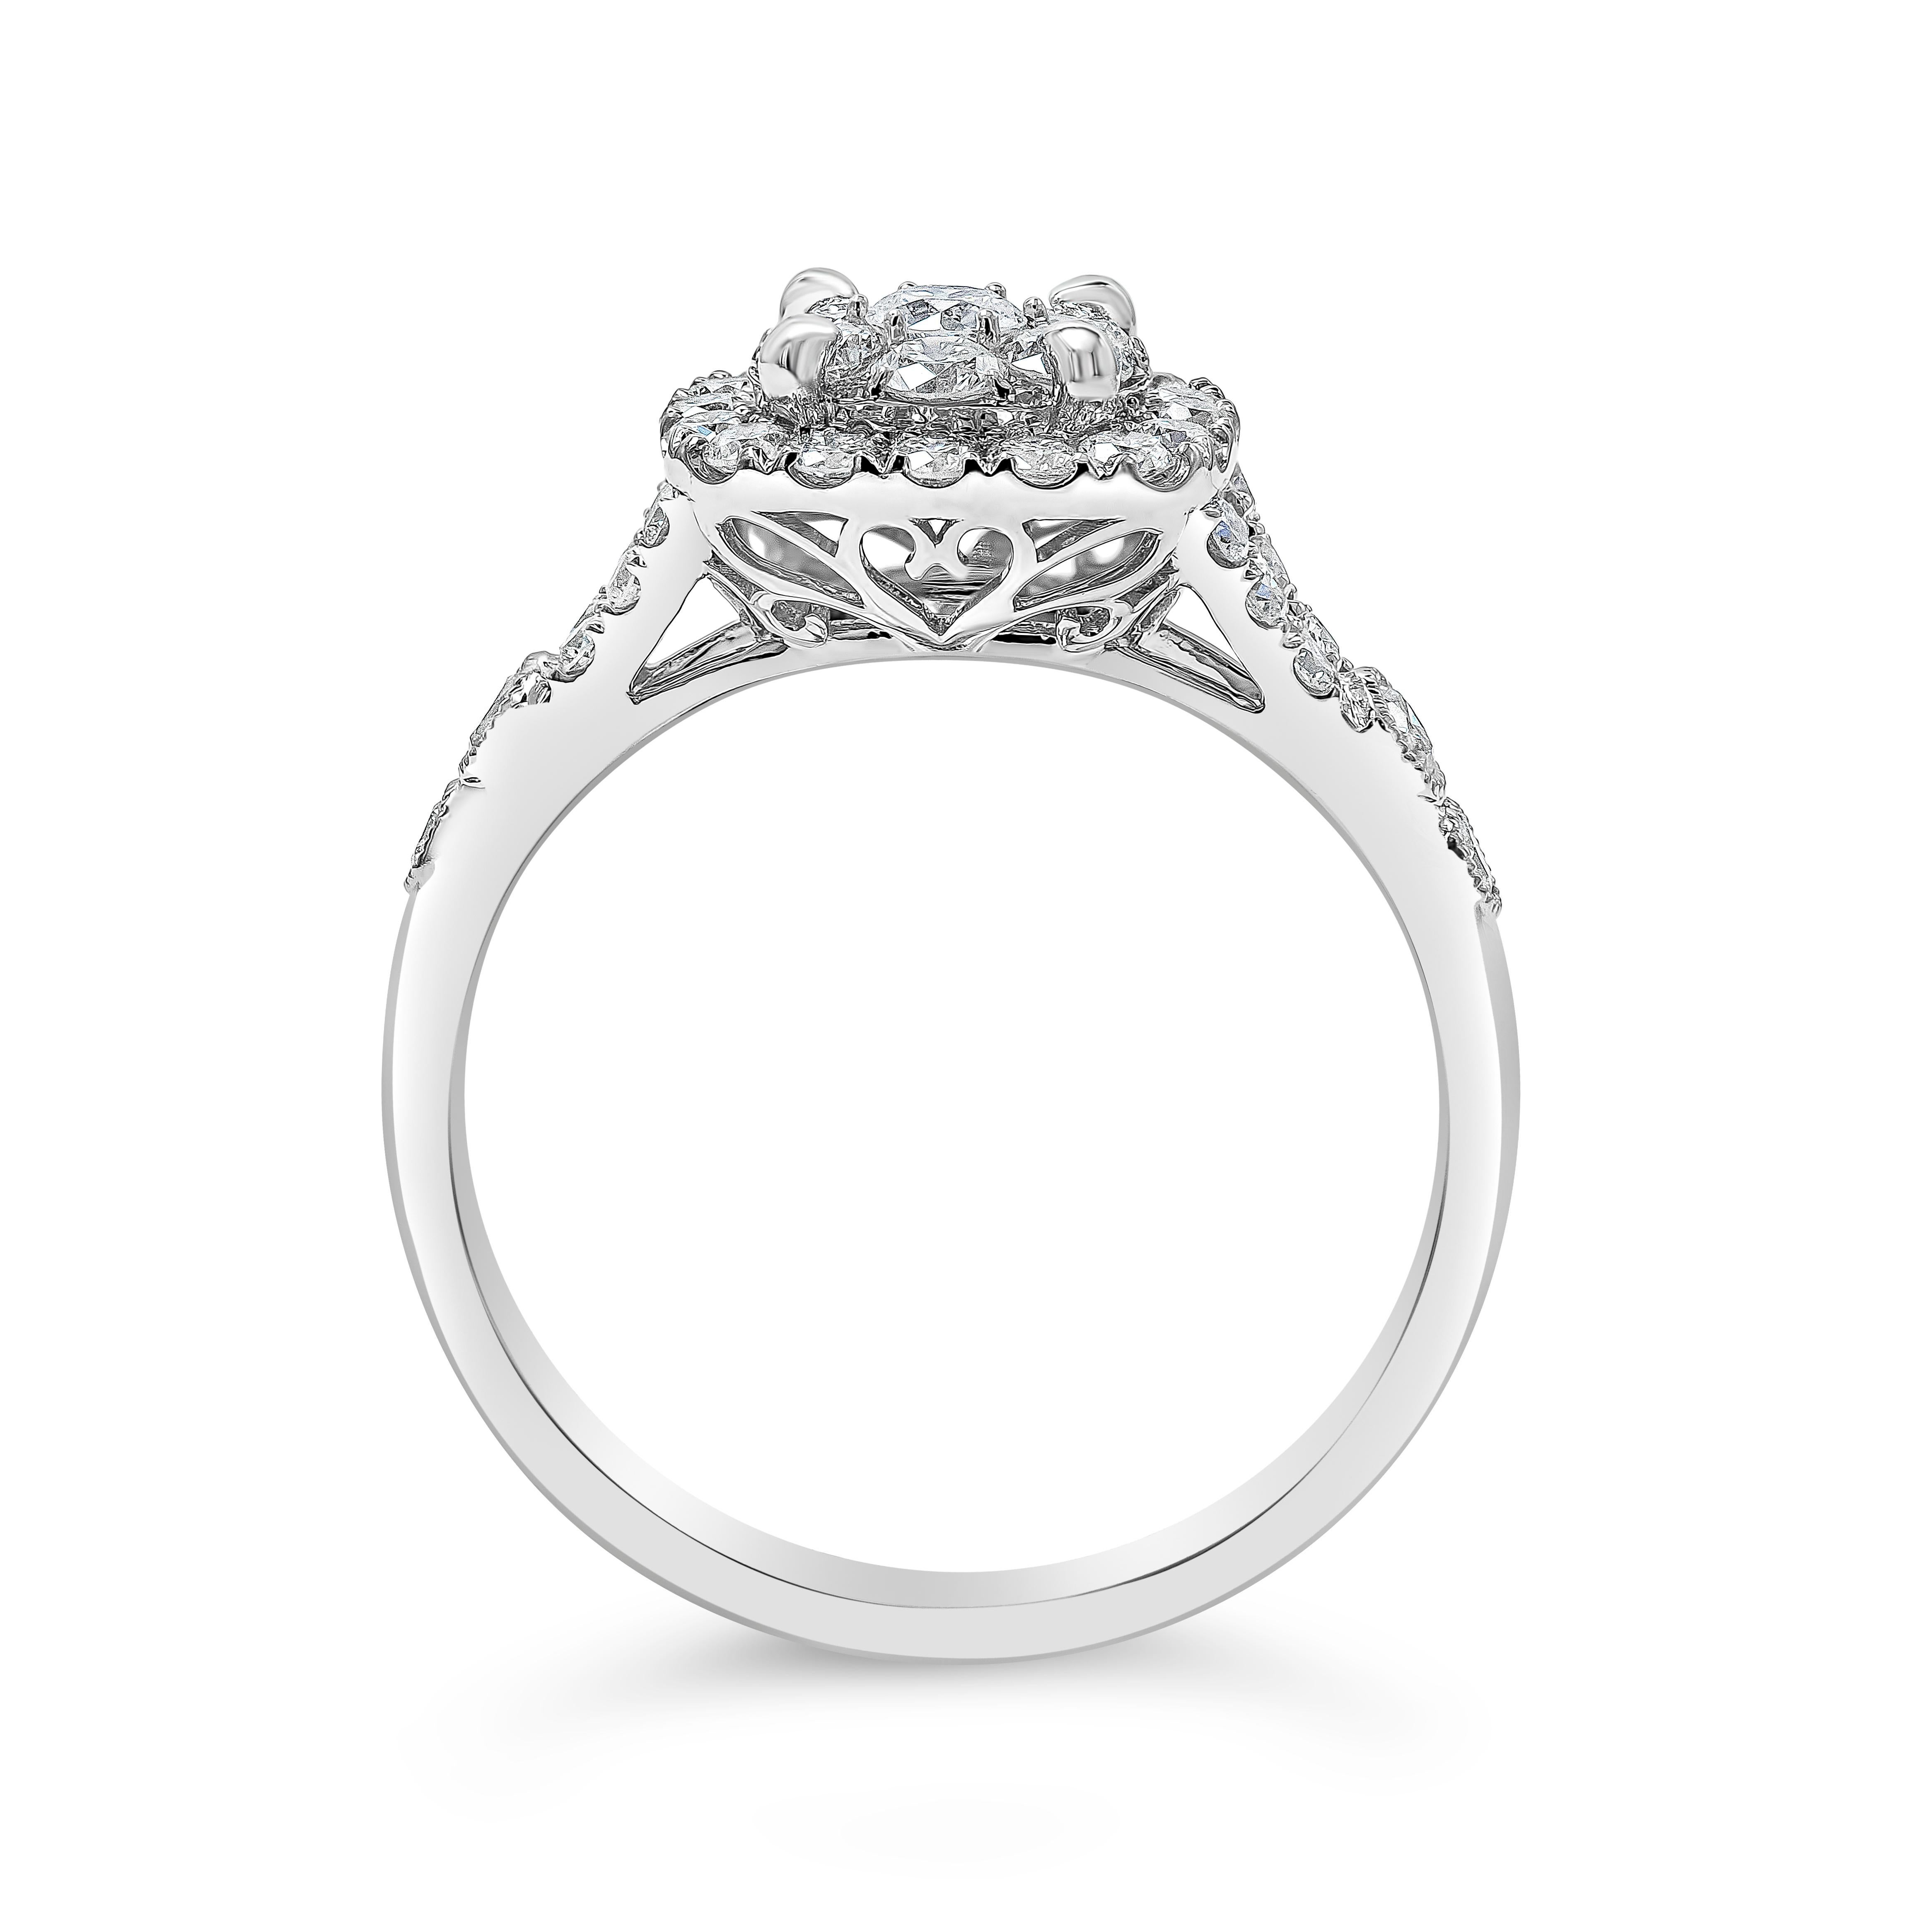 Taille ronde 0.88 Carats Total Round Cluster Diamond Cushion Shape Halo Engagement Ring en vente